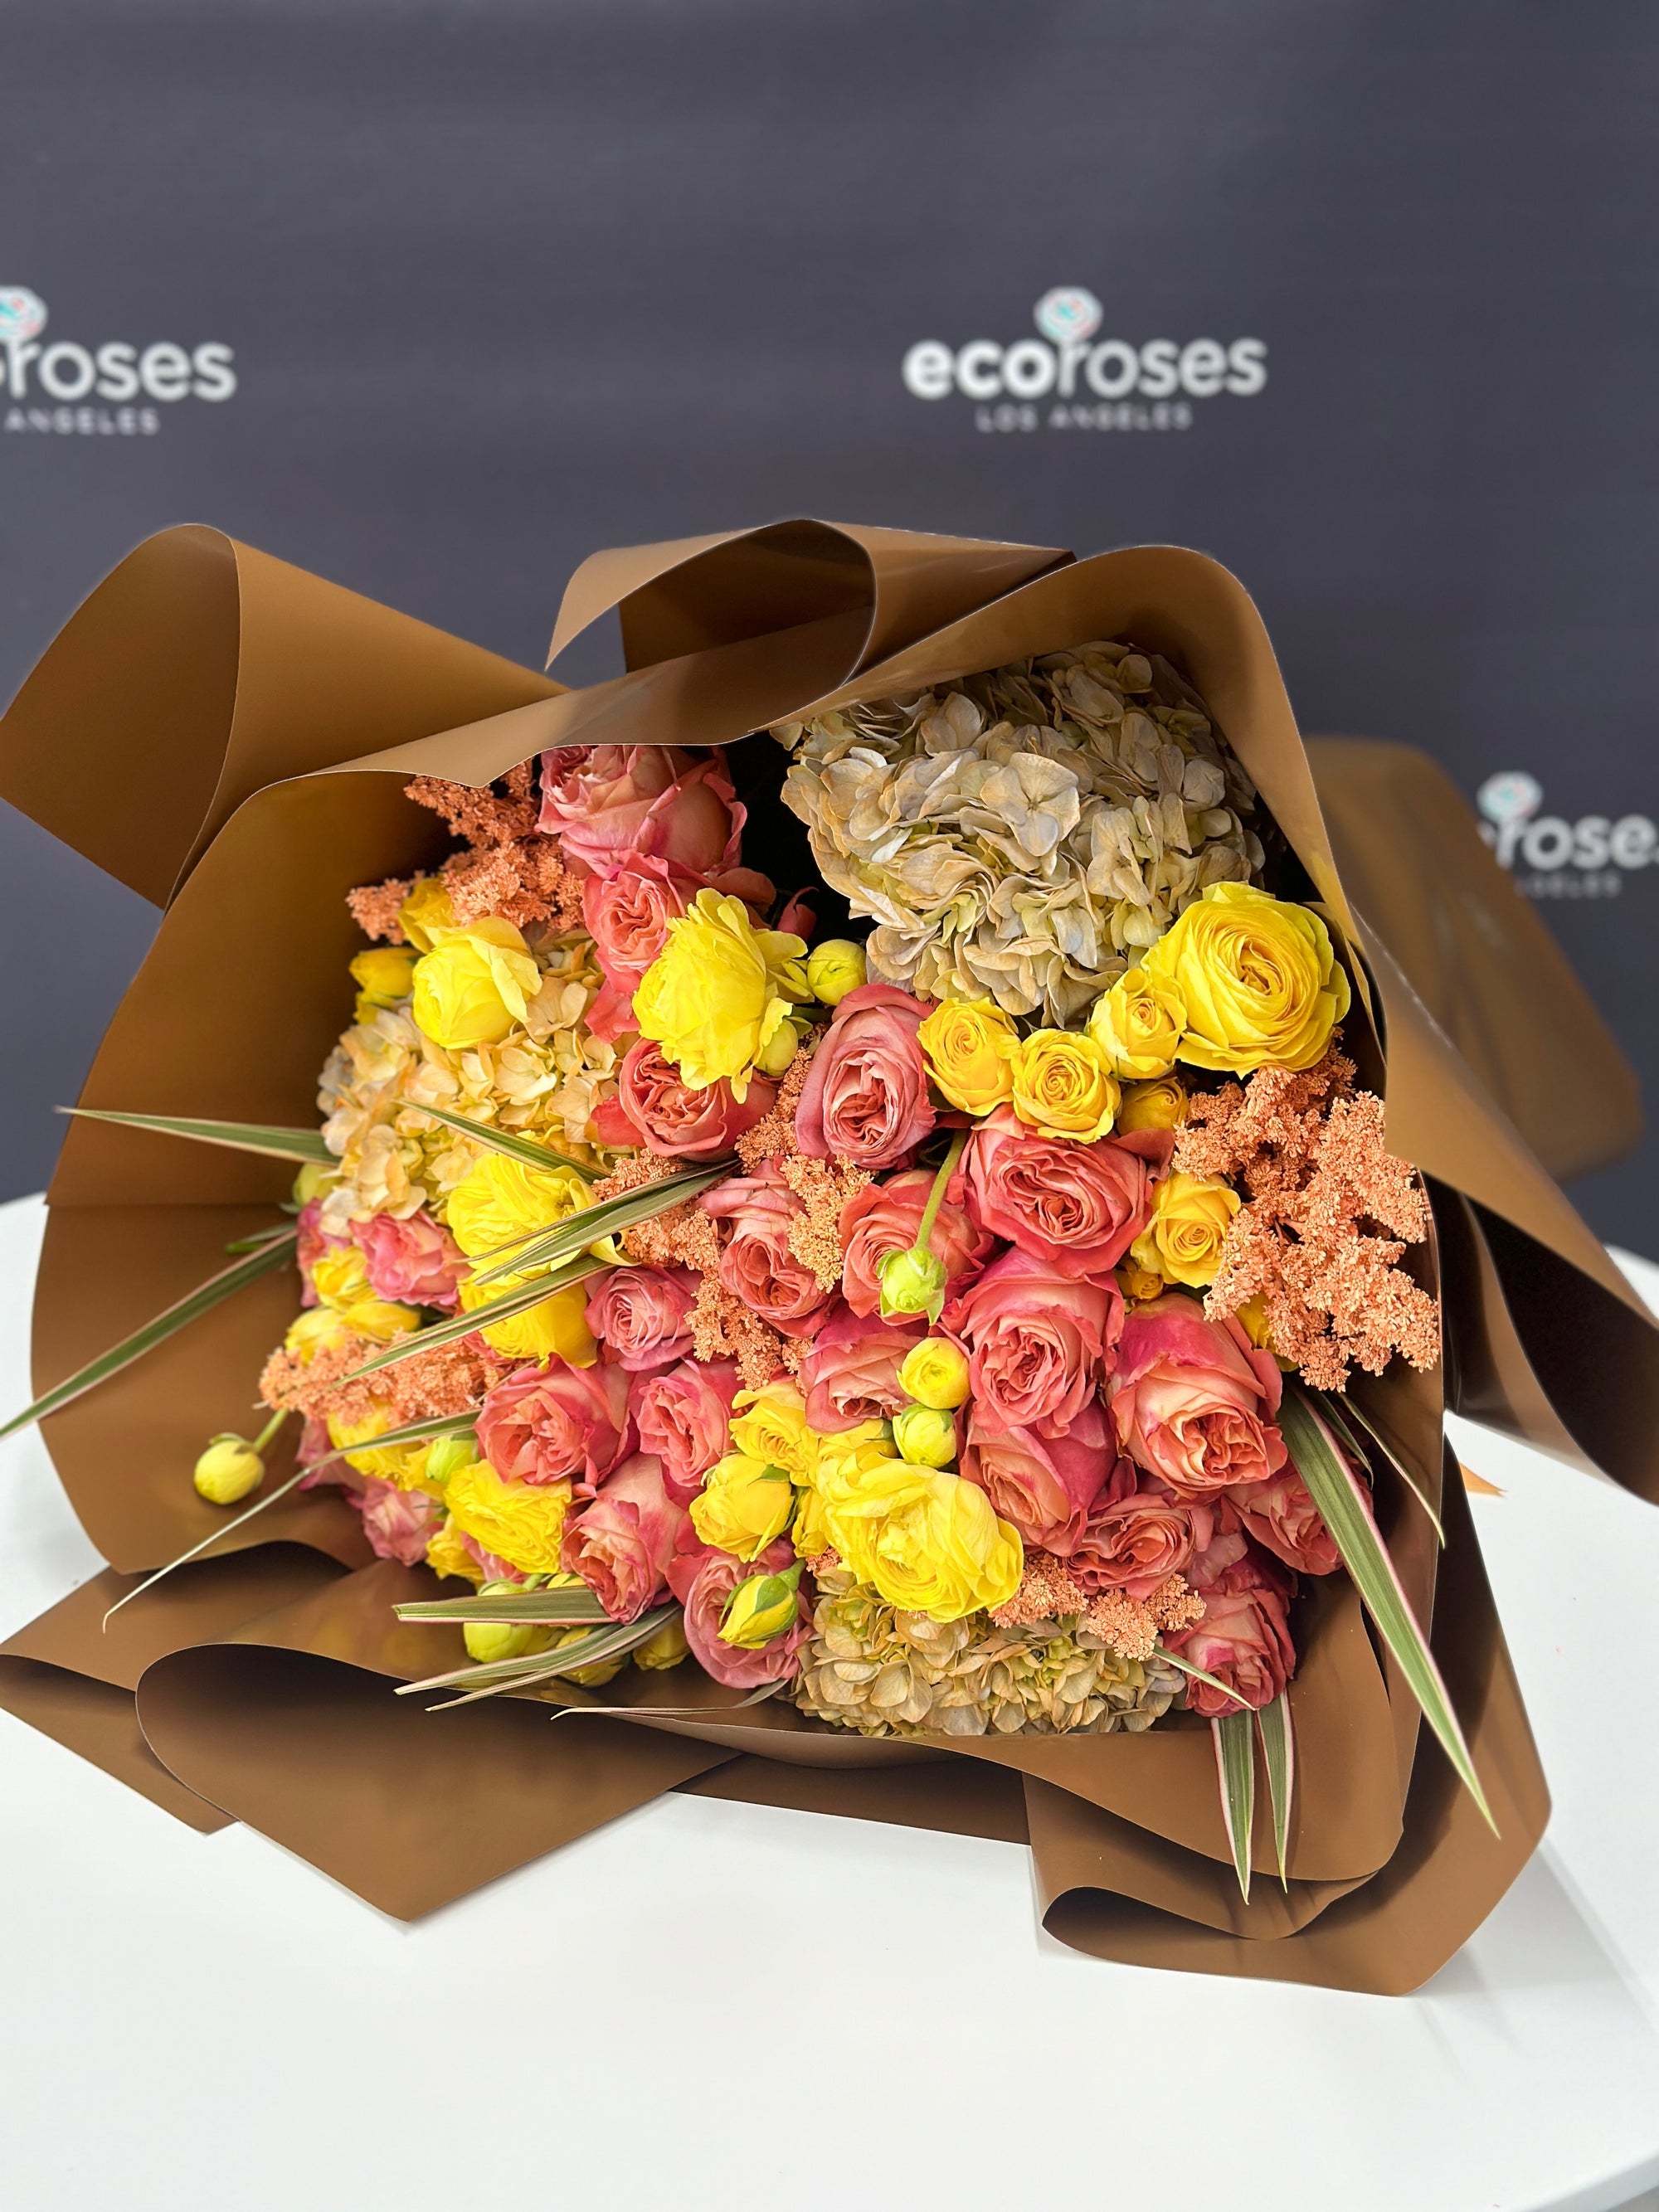 Glendale Flowers Amber Glow Bouquet! This deluxe bouquet features vibrant yellow roses that will brighten up any room. Perfect for bringing joy and sunshine to your loved ones.